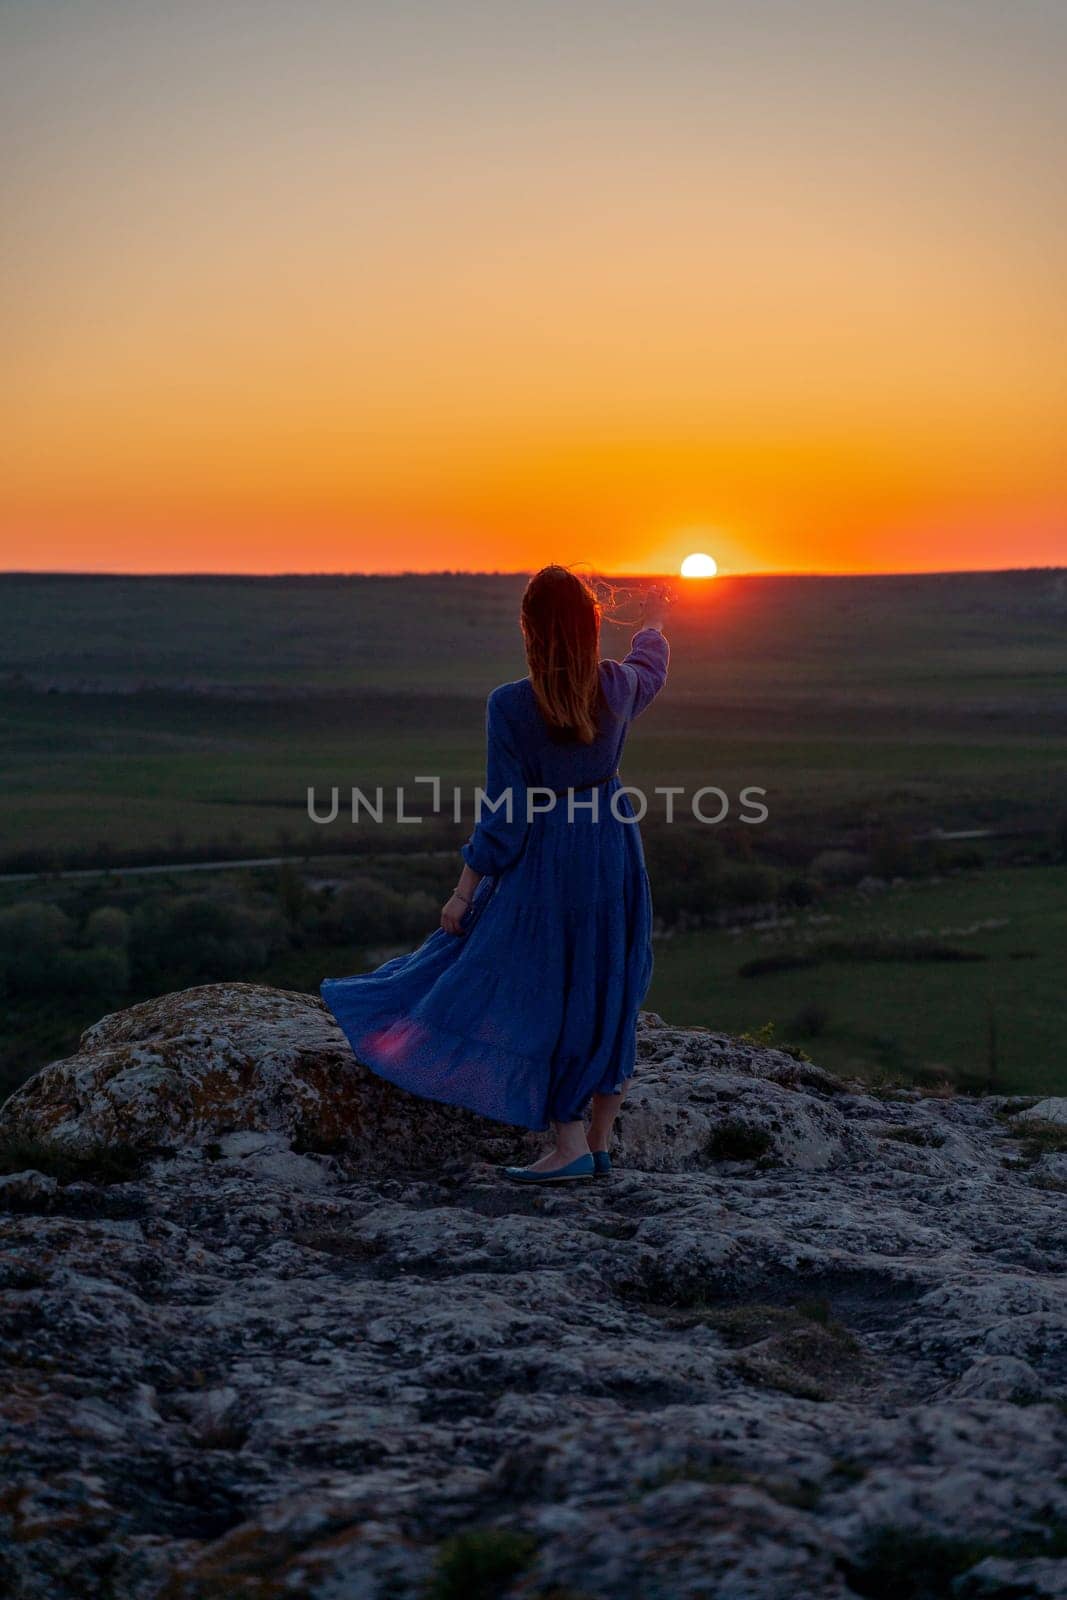 Silhouette of a girl in a blue dress standing on a rock in the mountains at sunset. She held out her hand to the sun up